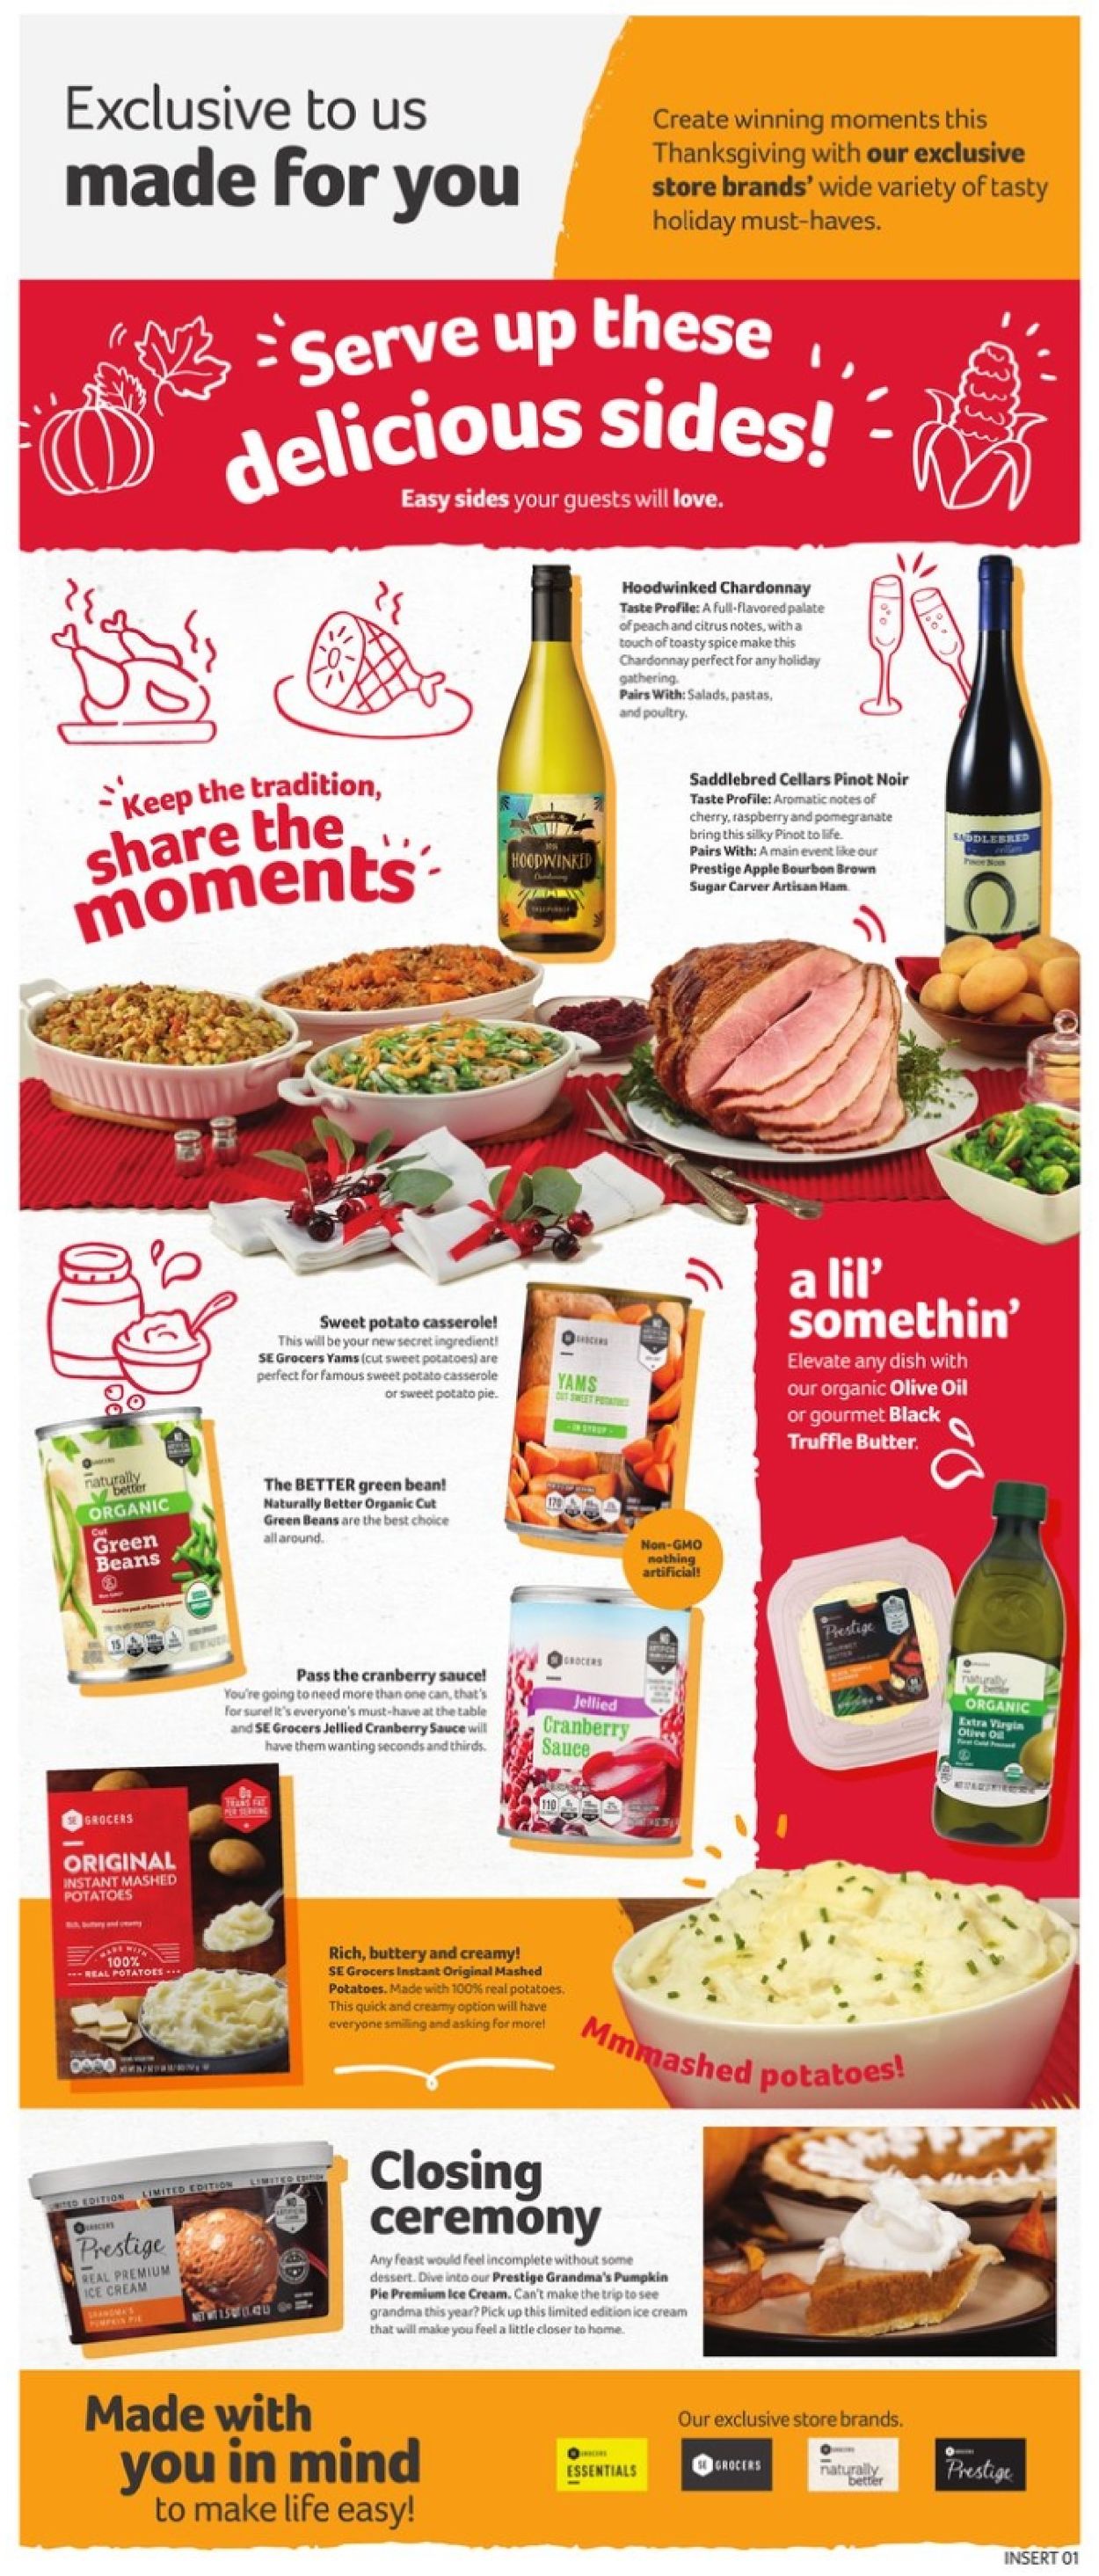 BI-LO Ad from 11/11/2020